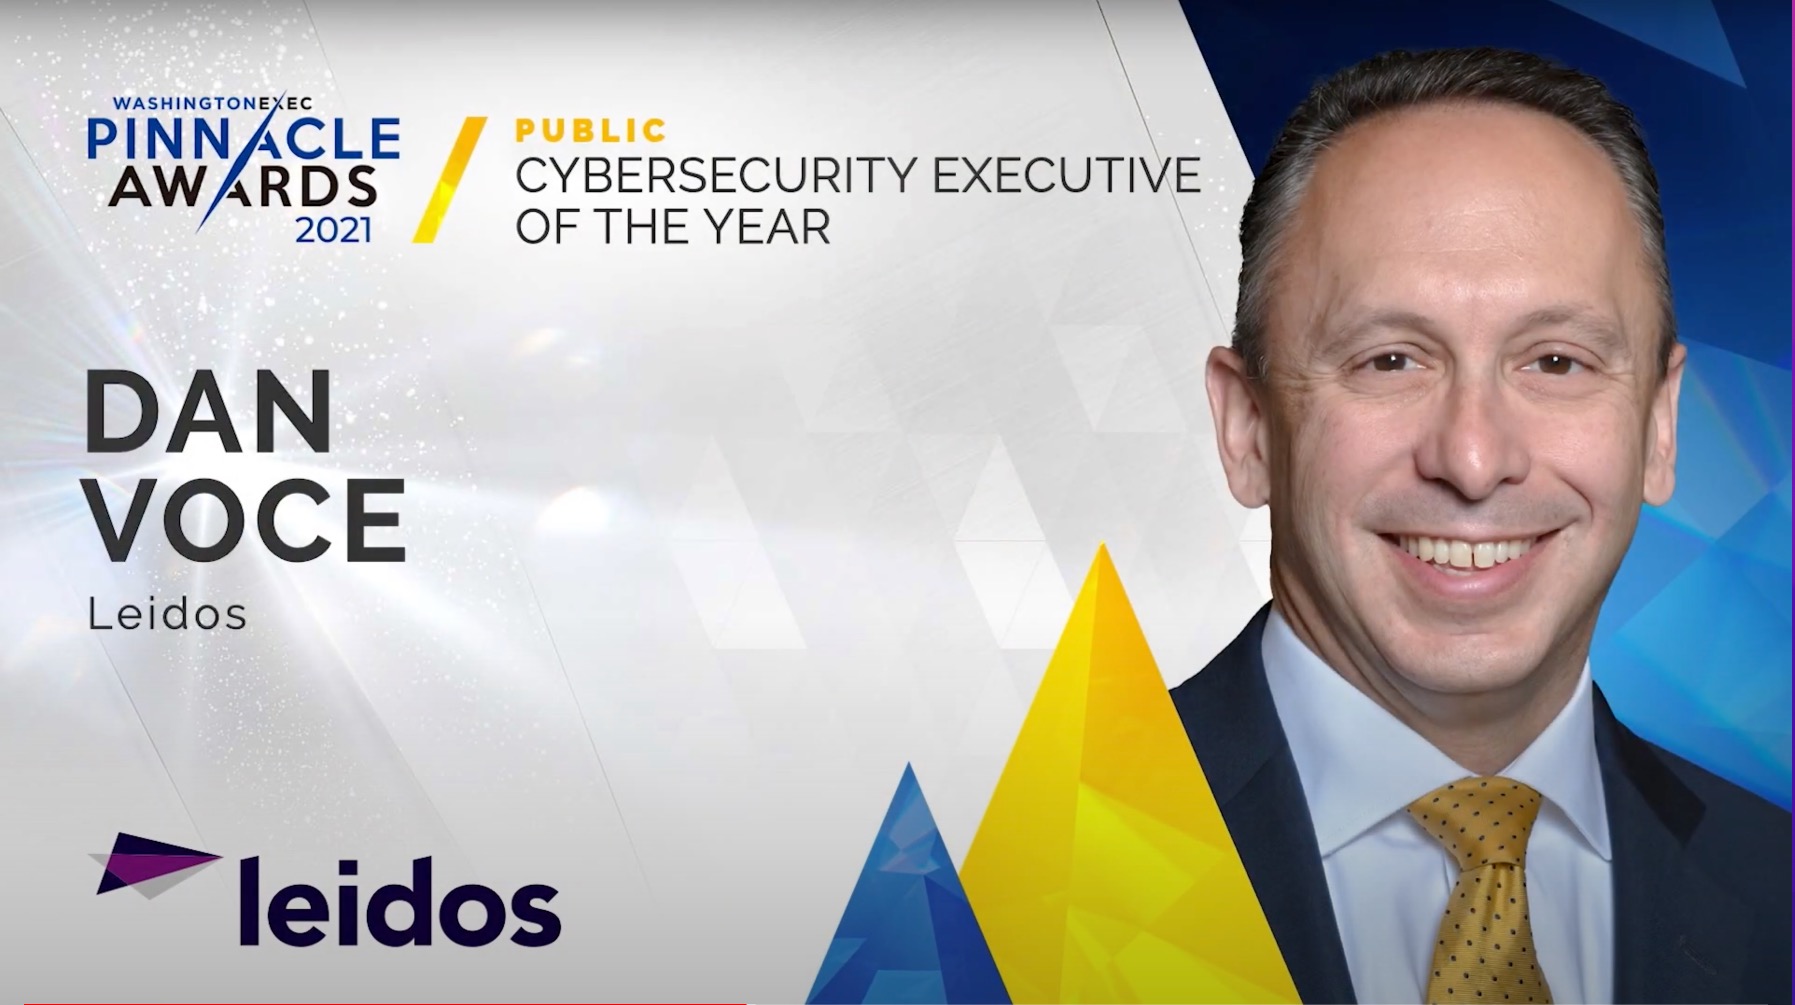 Cybersecurity - Congratulations to Dan Voce from Leidos on winning the award for Cybersecurity Executive of the Year in the Public Sector